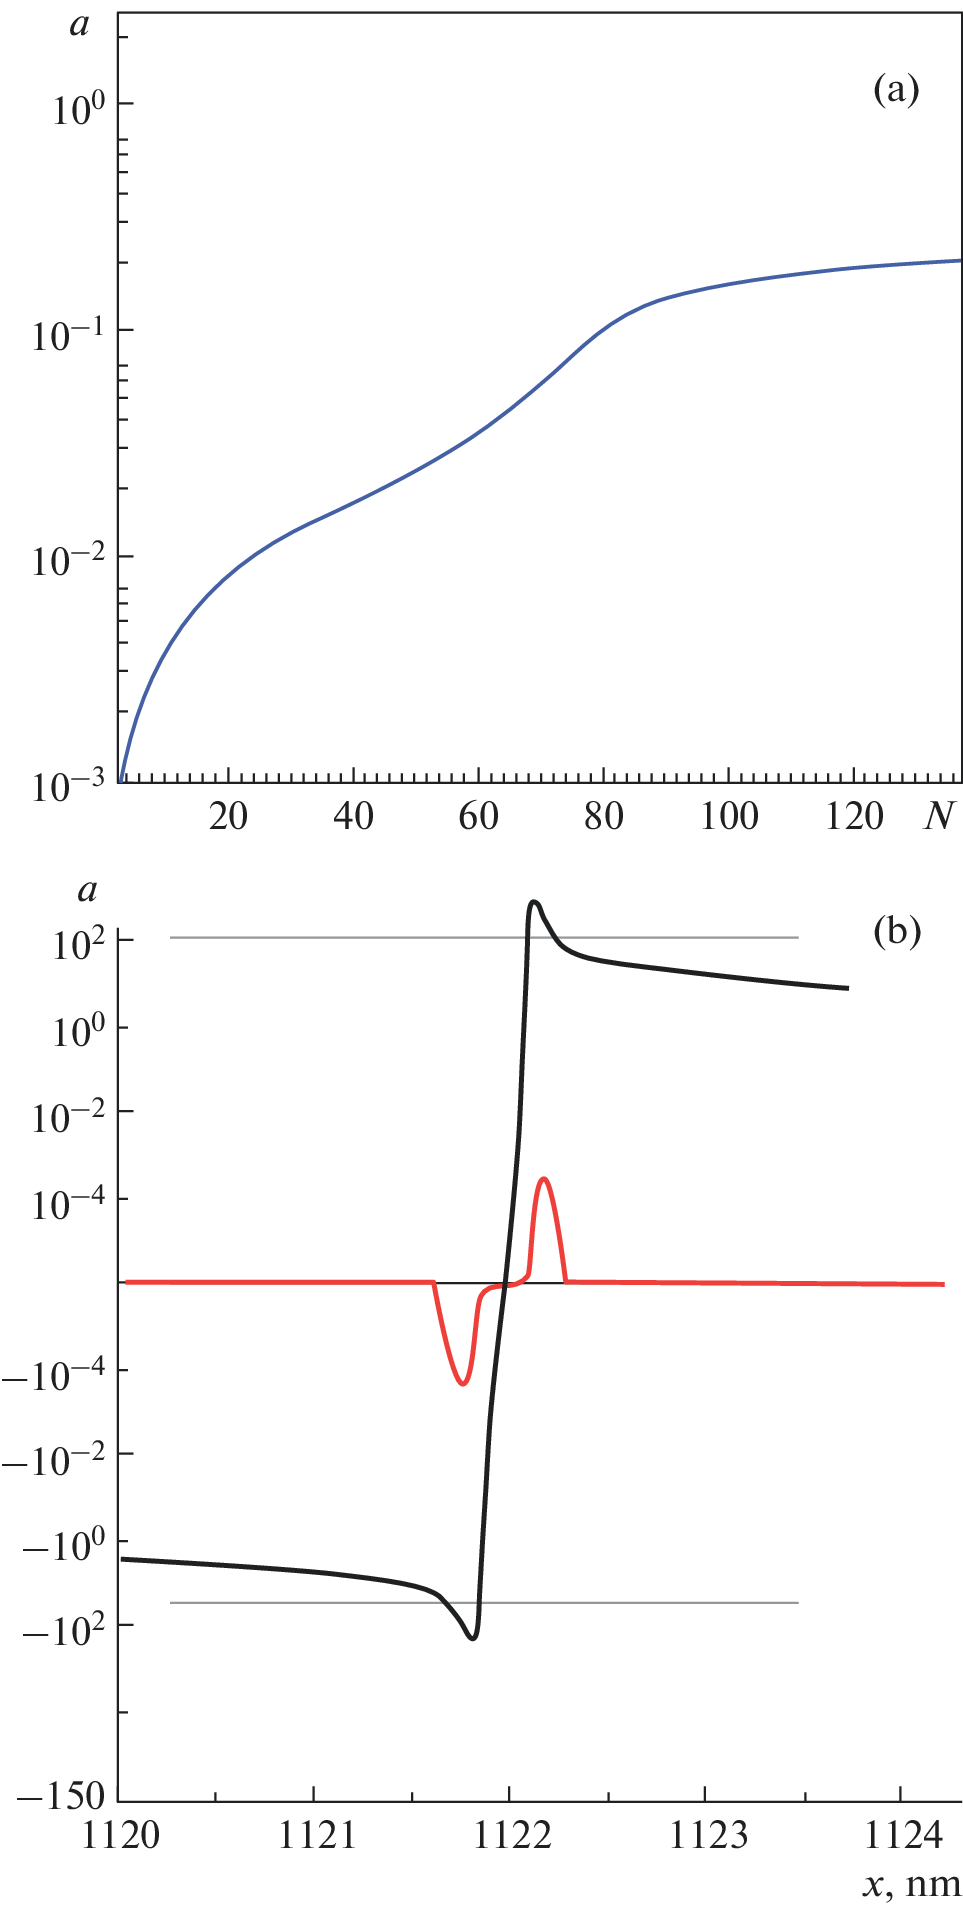 Amplification of Short-Wavelength Subattopulses in a Free-Electron Laser Using Electrons Accelerated in a Laser Plasma